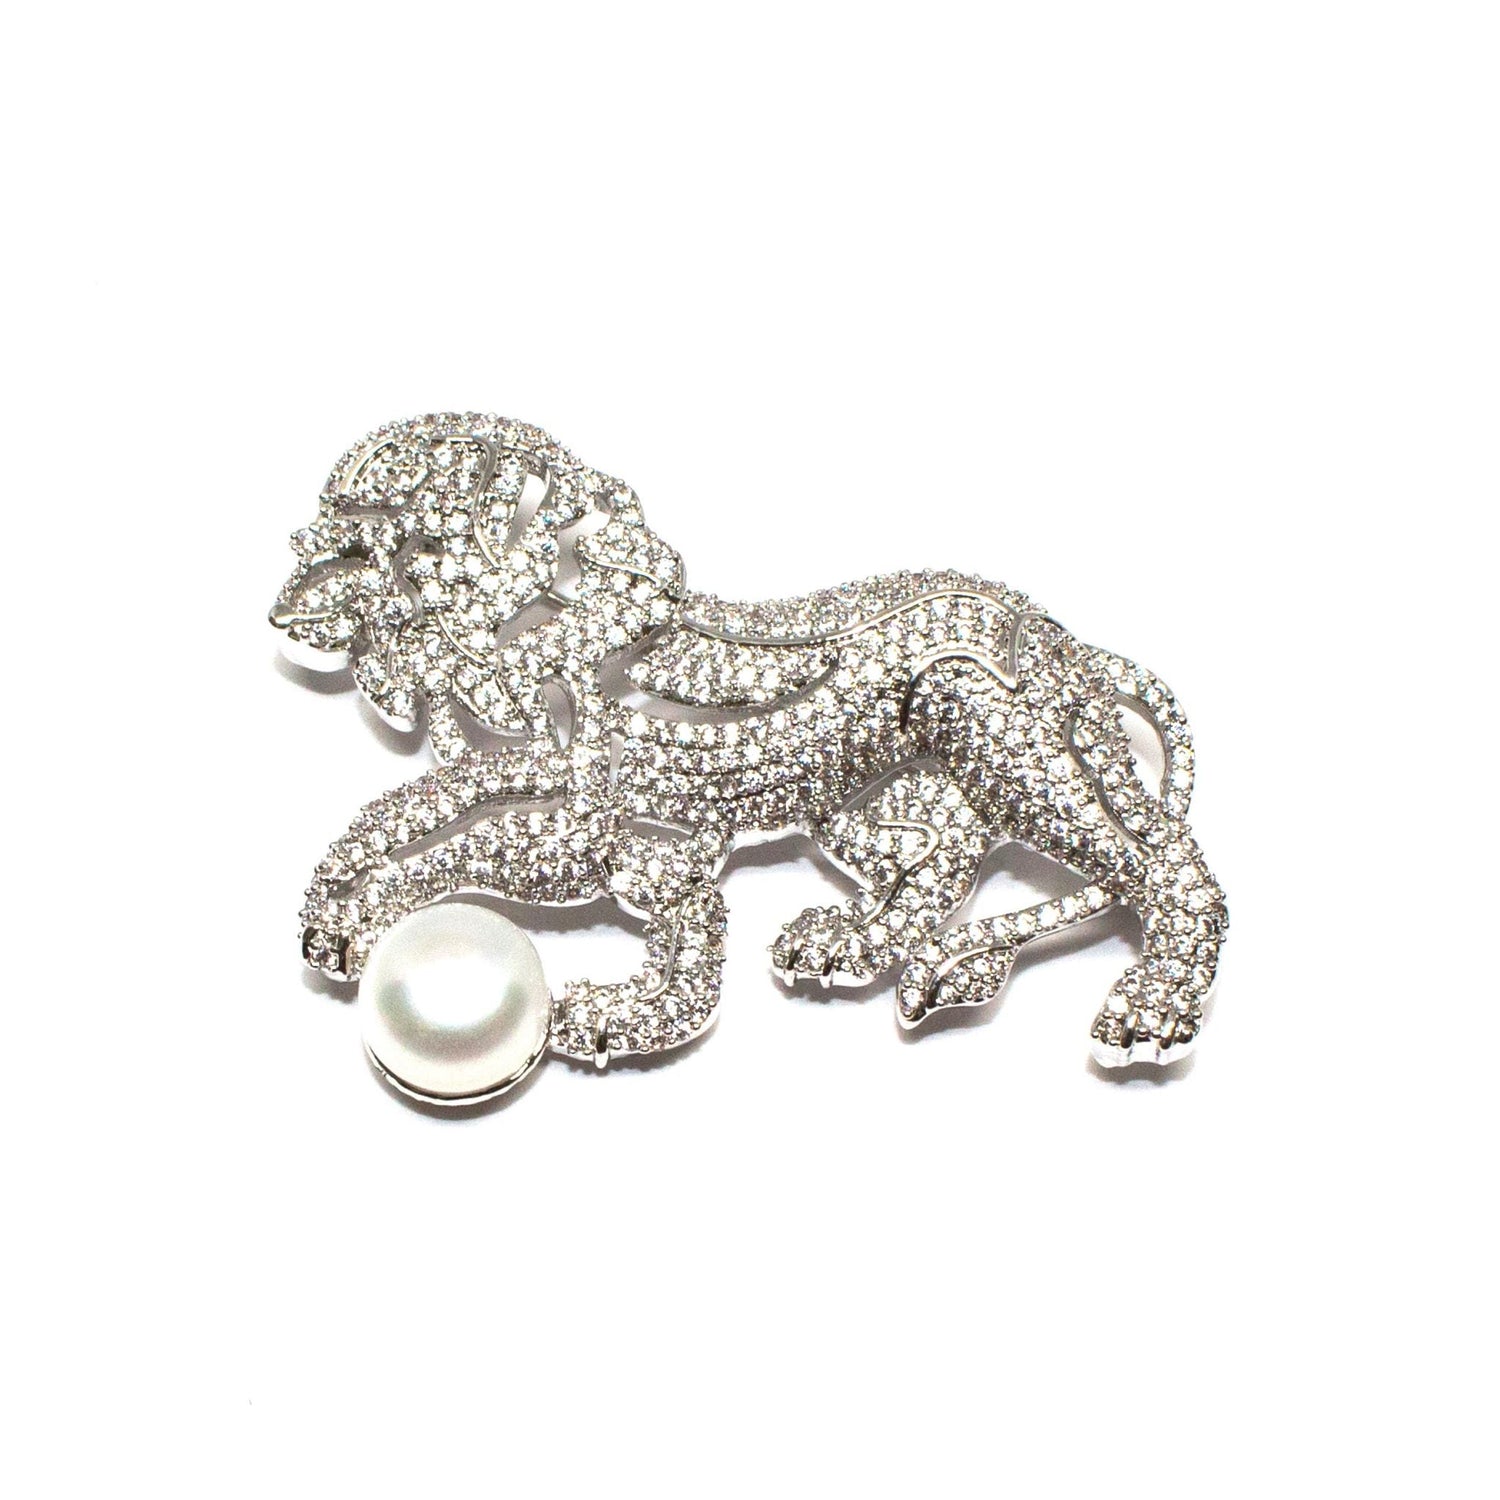 LION PEARL BROOCH - Timeless Pearl